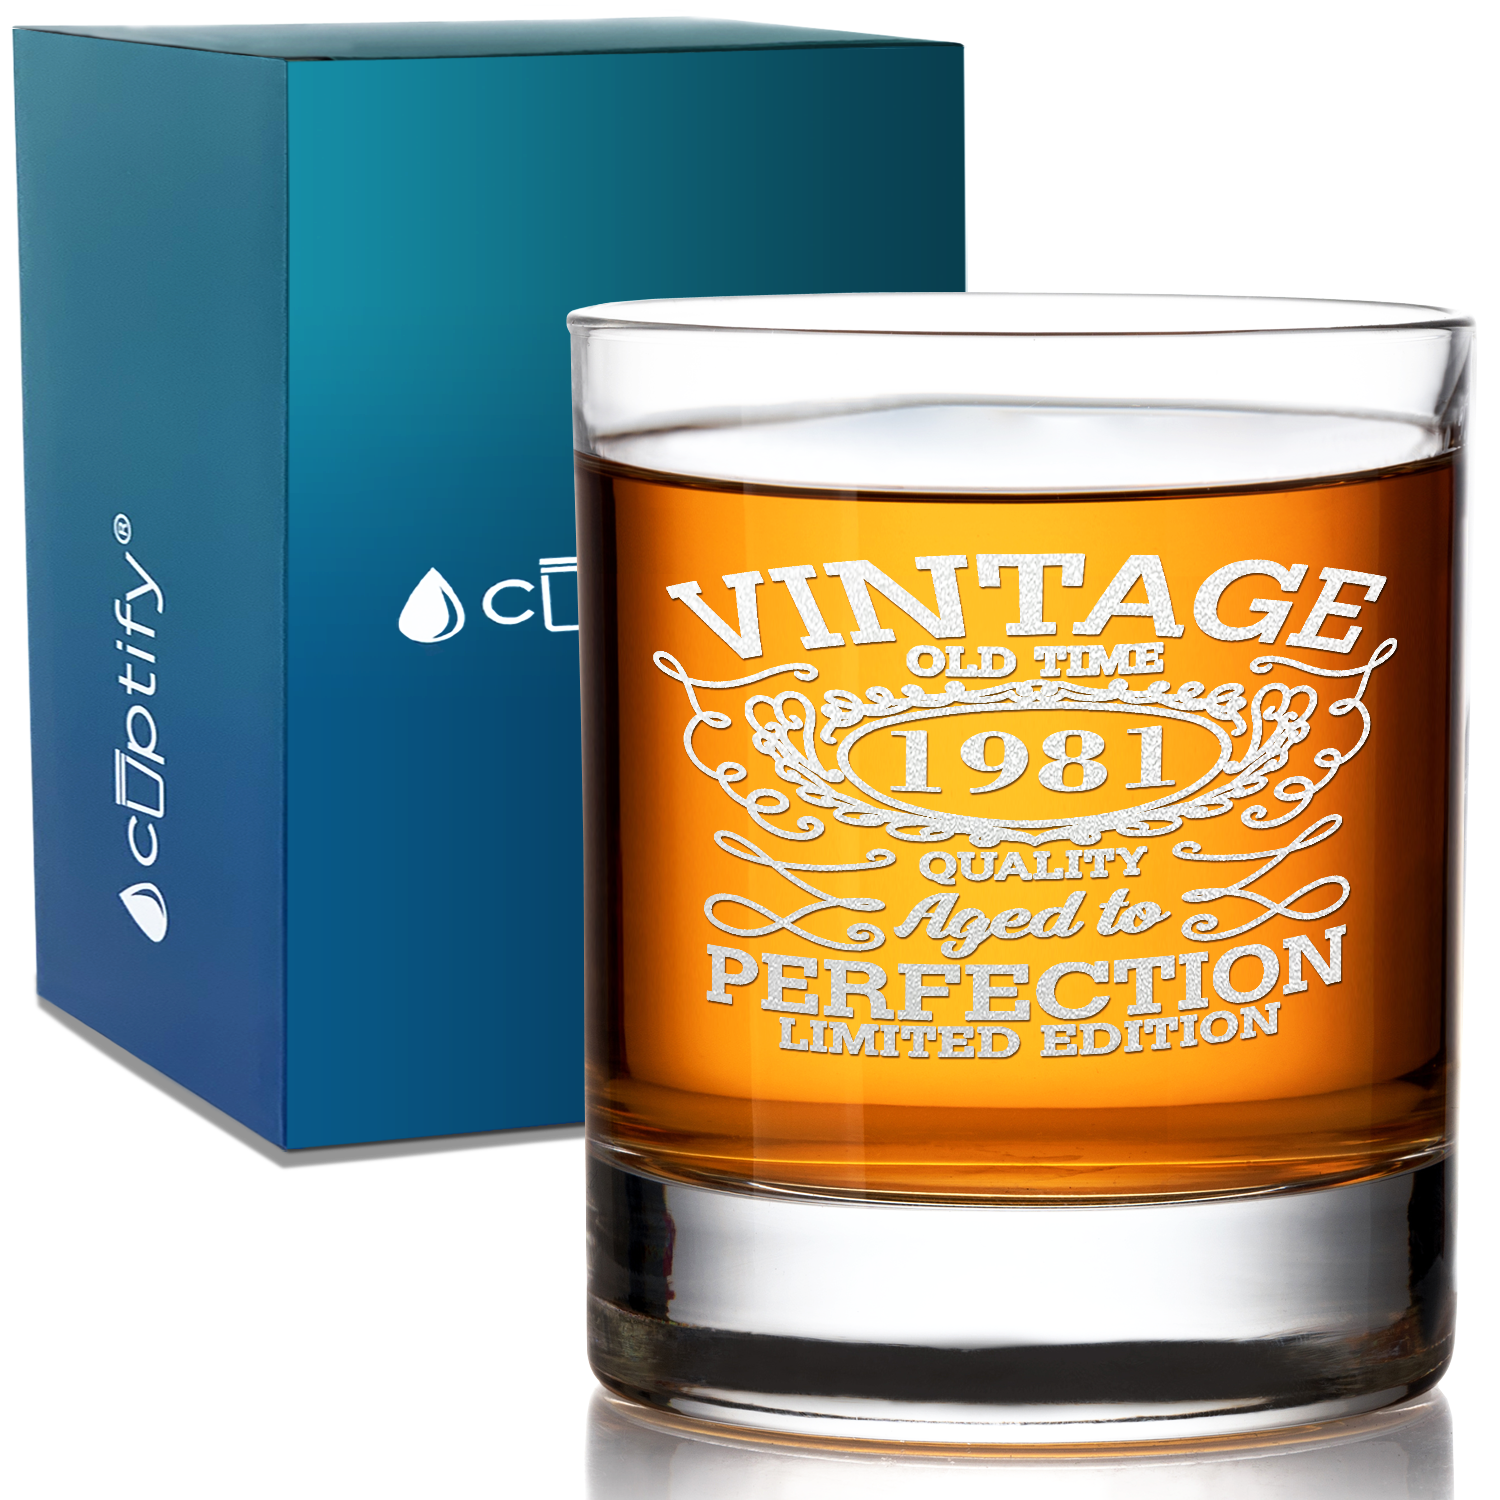 40th Birthday Vintage 40 Years Old Time 1981 Quality Laser Engraved 10.25oz Old Fashion Glass